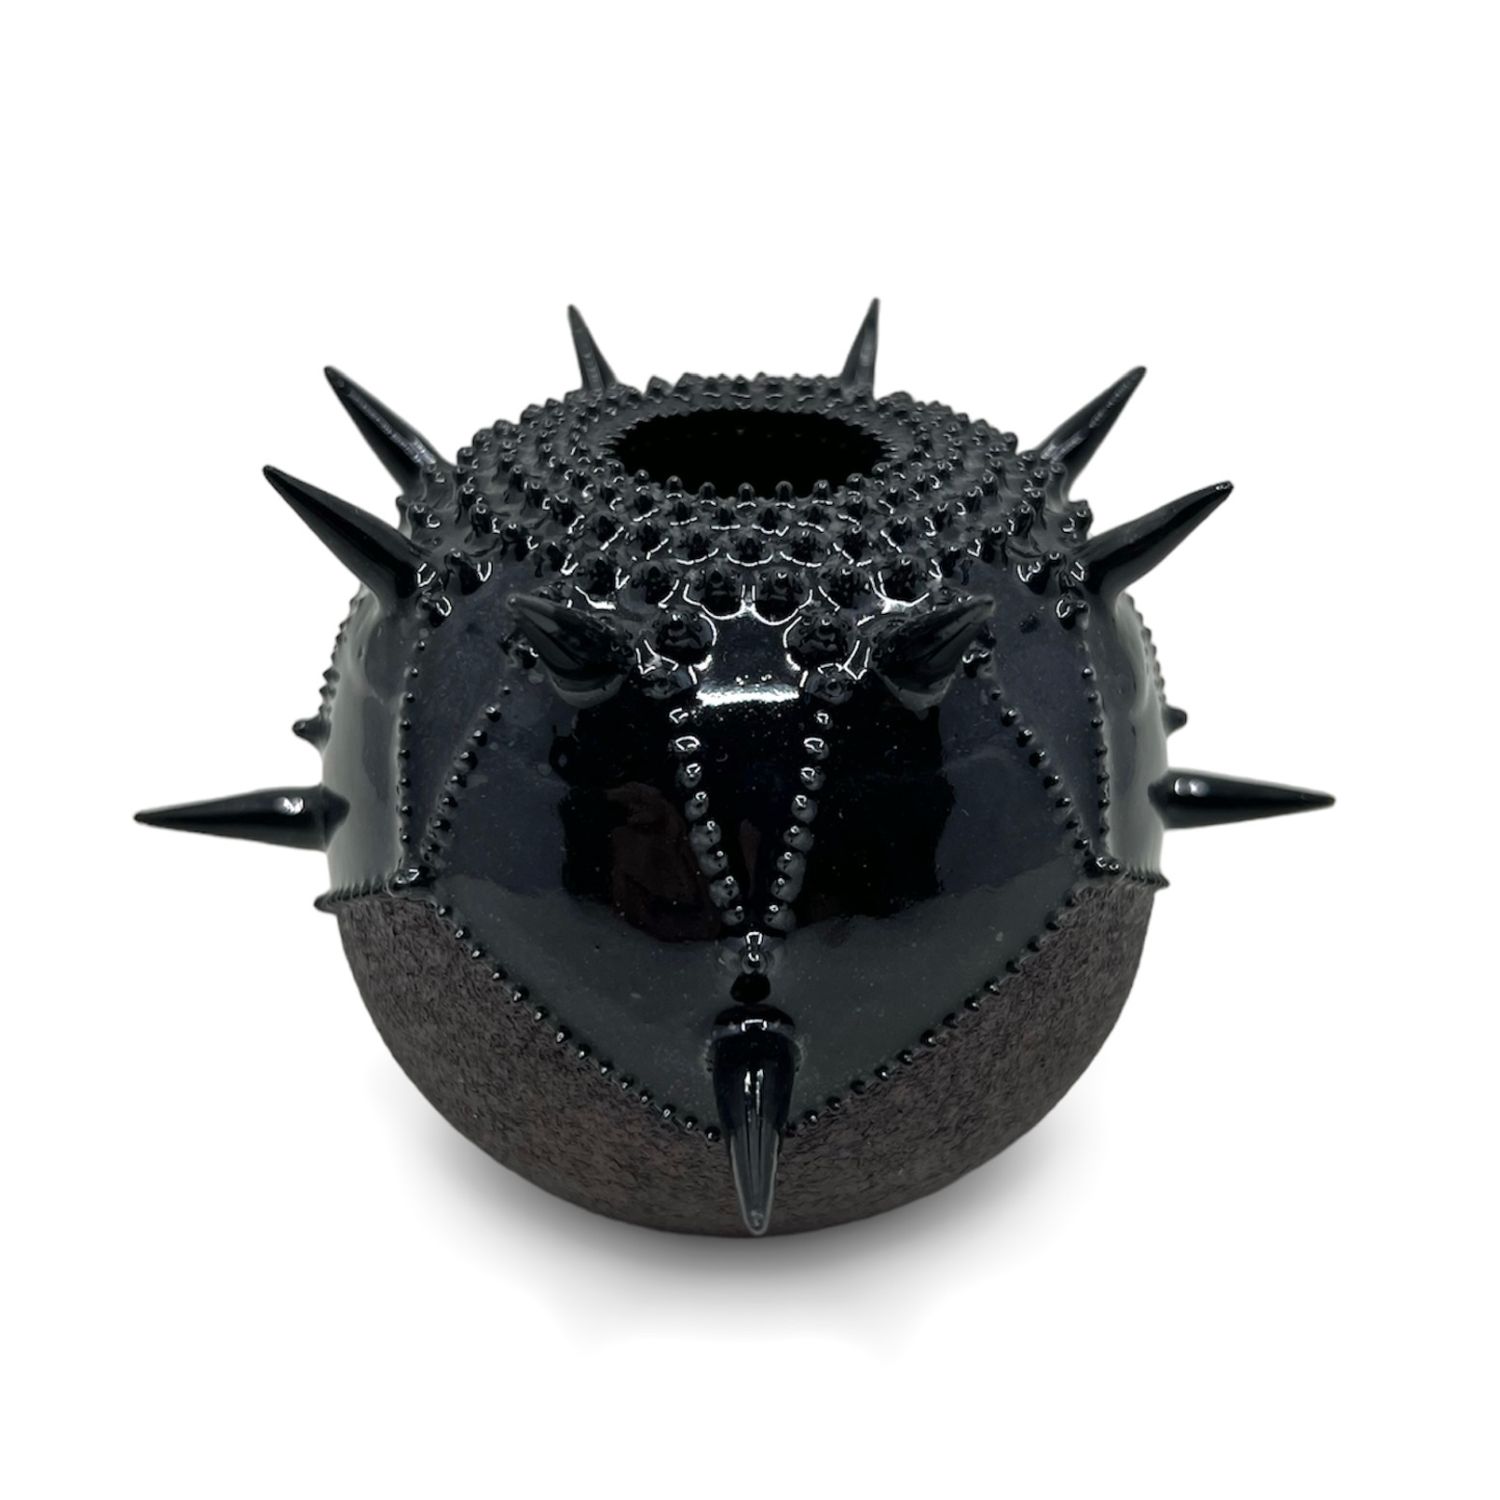 Zara Gardner: Black Urchin Sculpture with Spikes Product Image 1 of 4